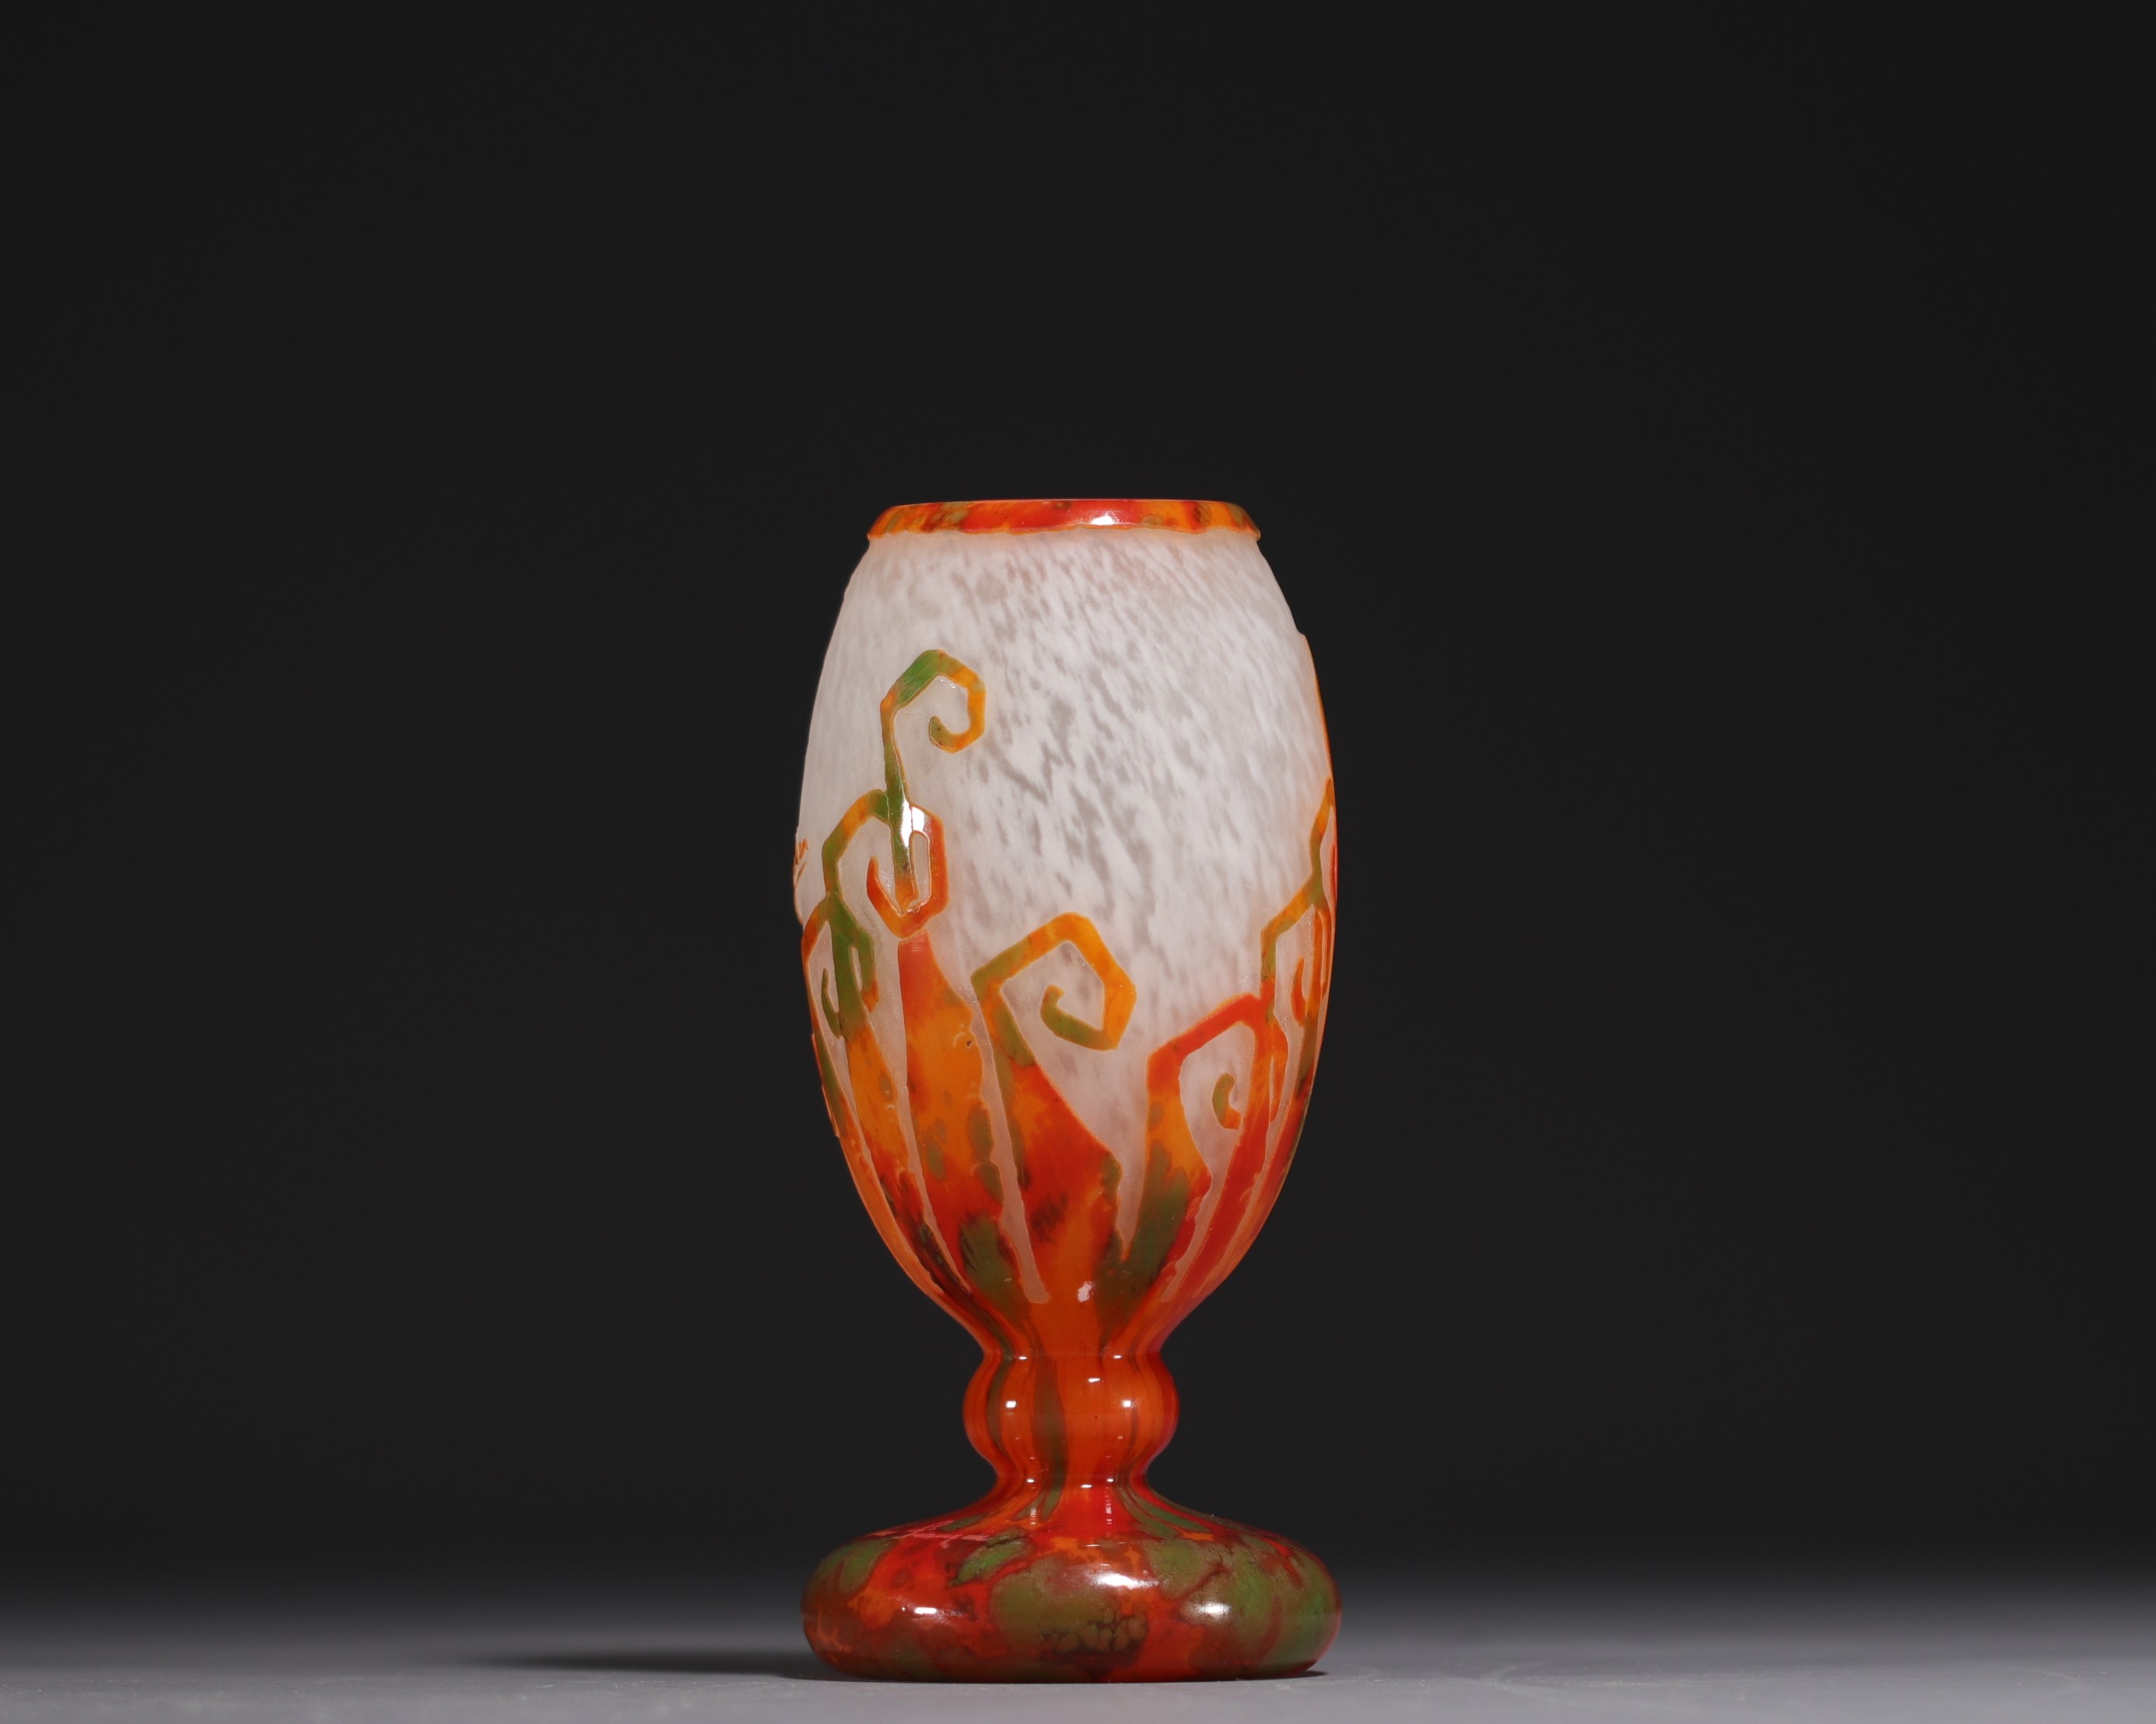 CHARDER - Acid-etched multi-layered glass vase decorated with ferns, signed in the decoration. - Image 2 of 4